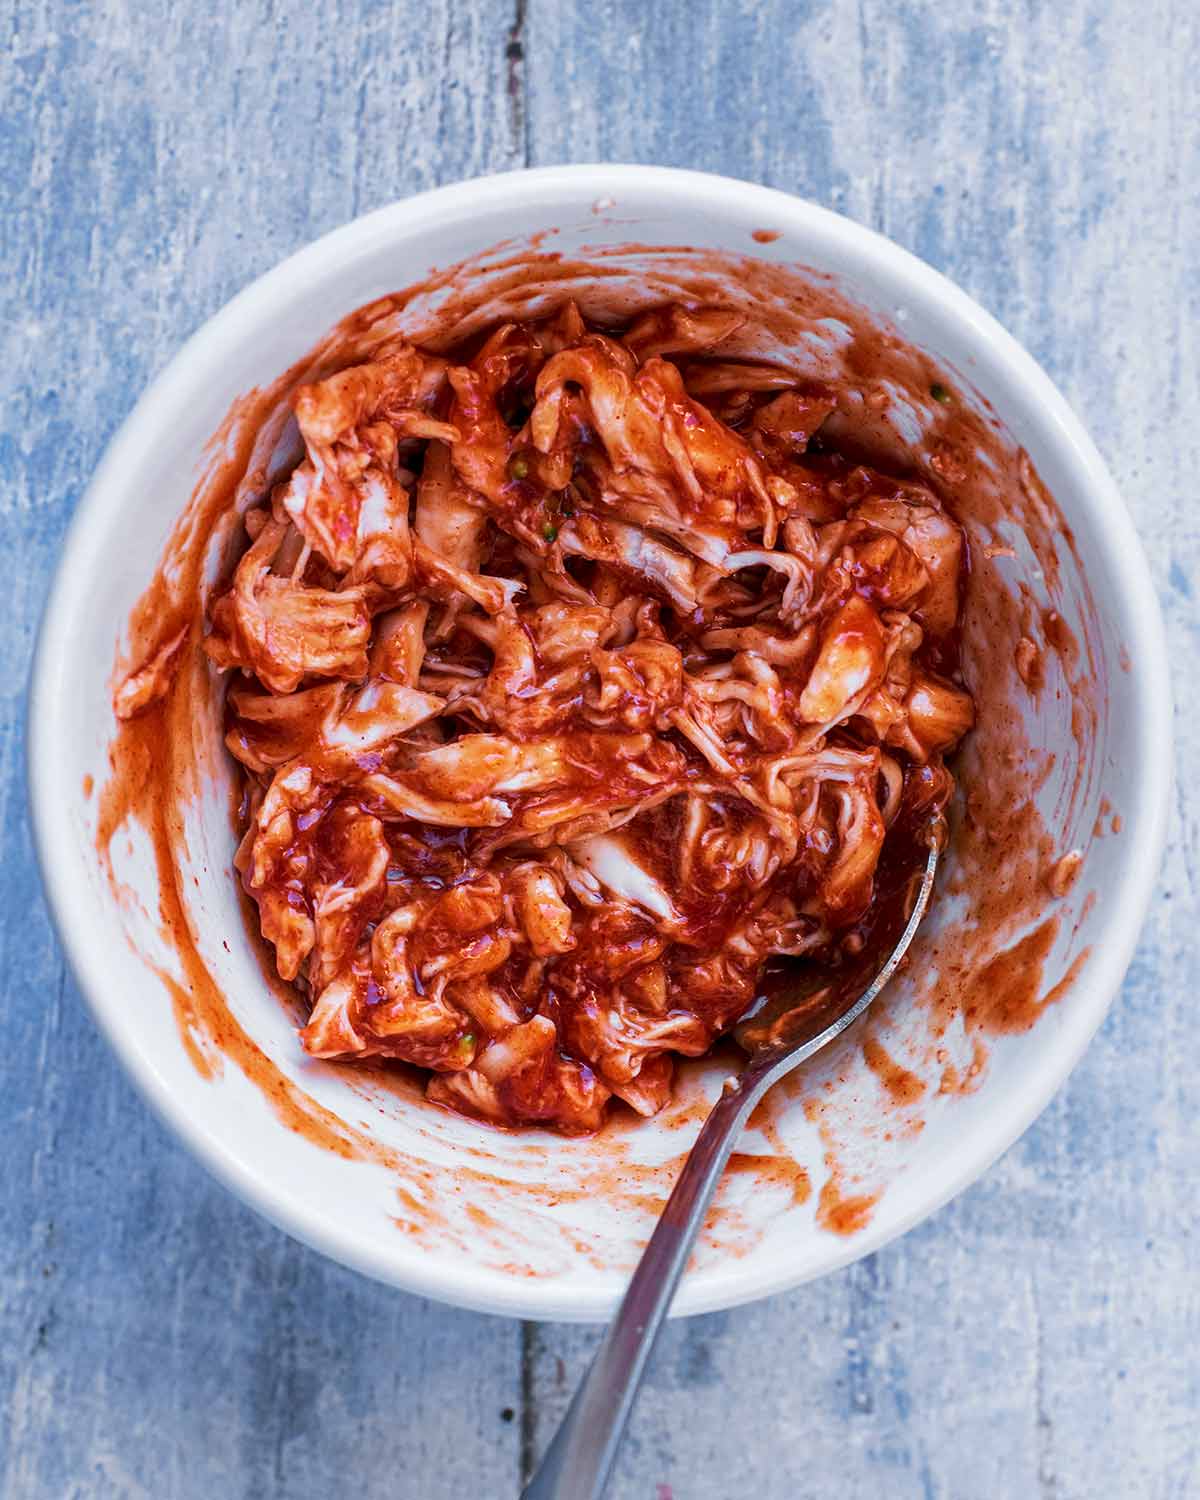 A small bowl of shredded turkey in a barbecue sauce.